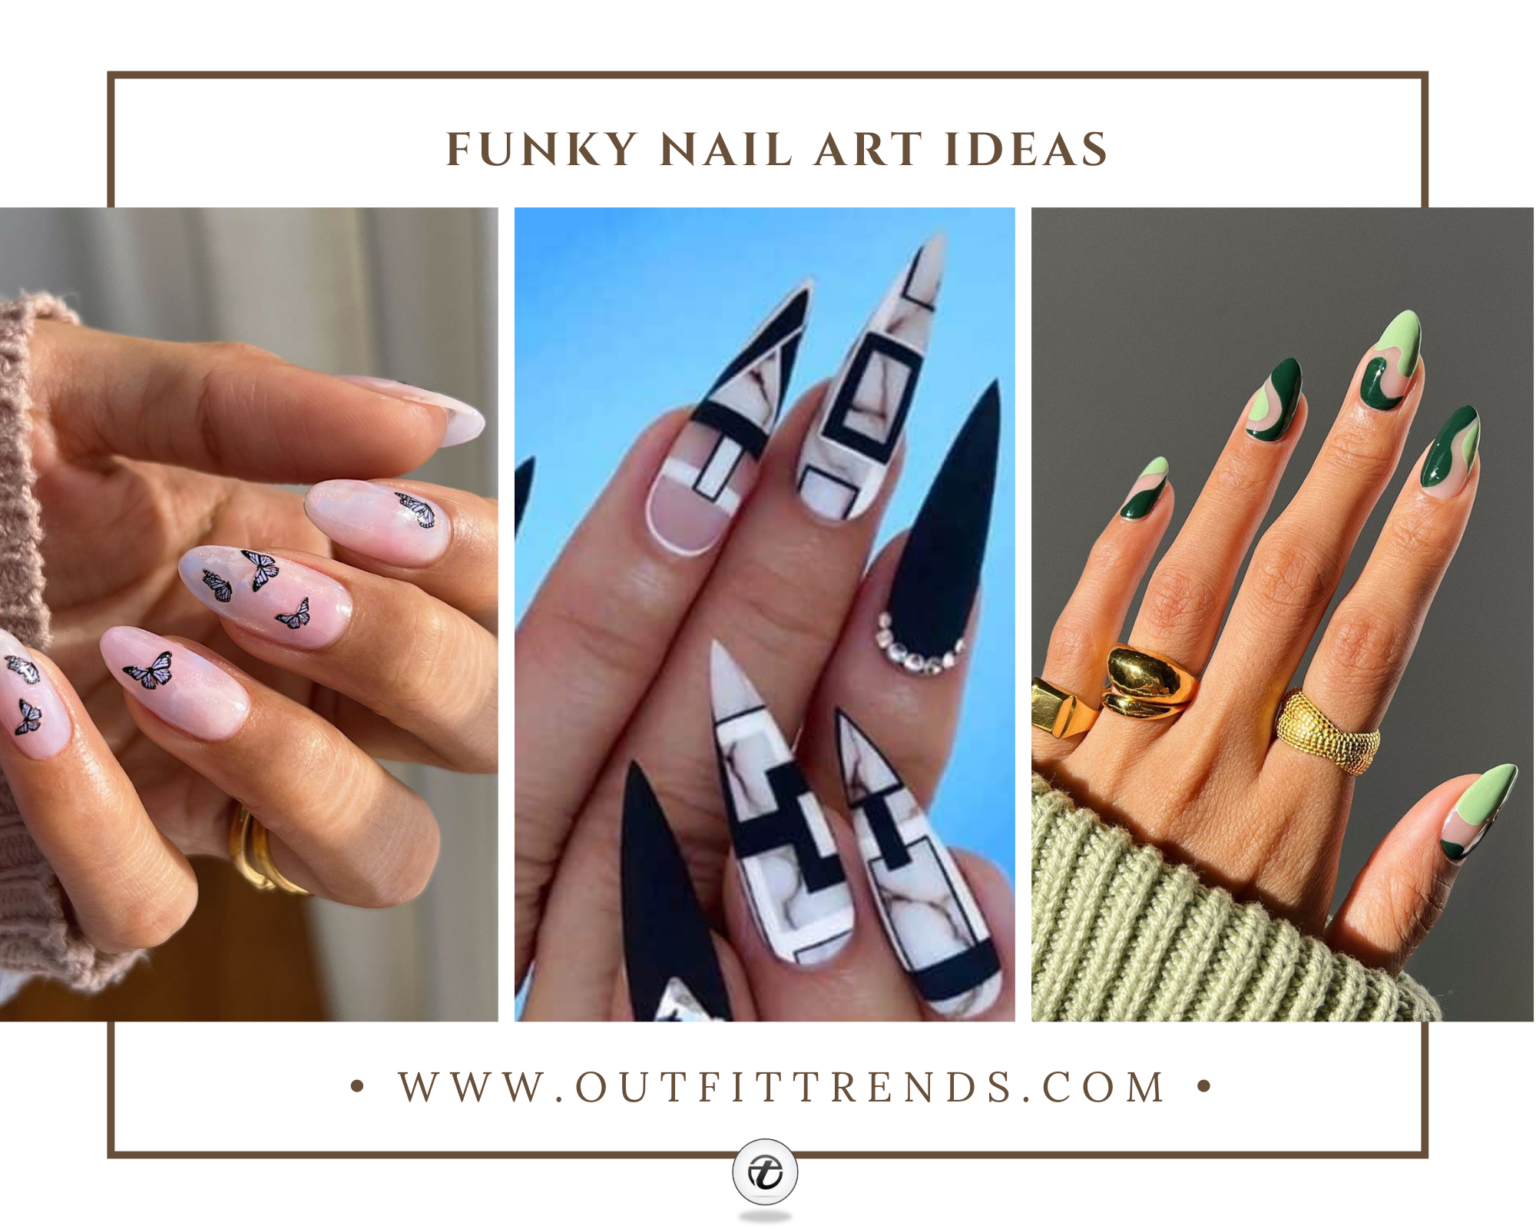 10. Fun and Funky Nail Designs for Music Festivals - wide 7